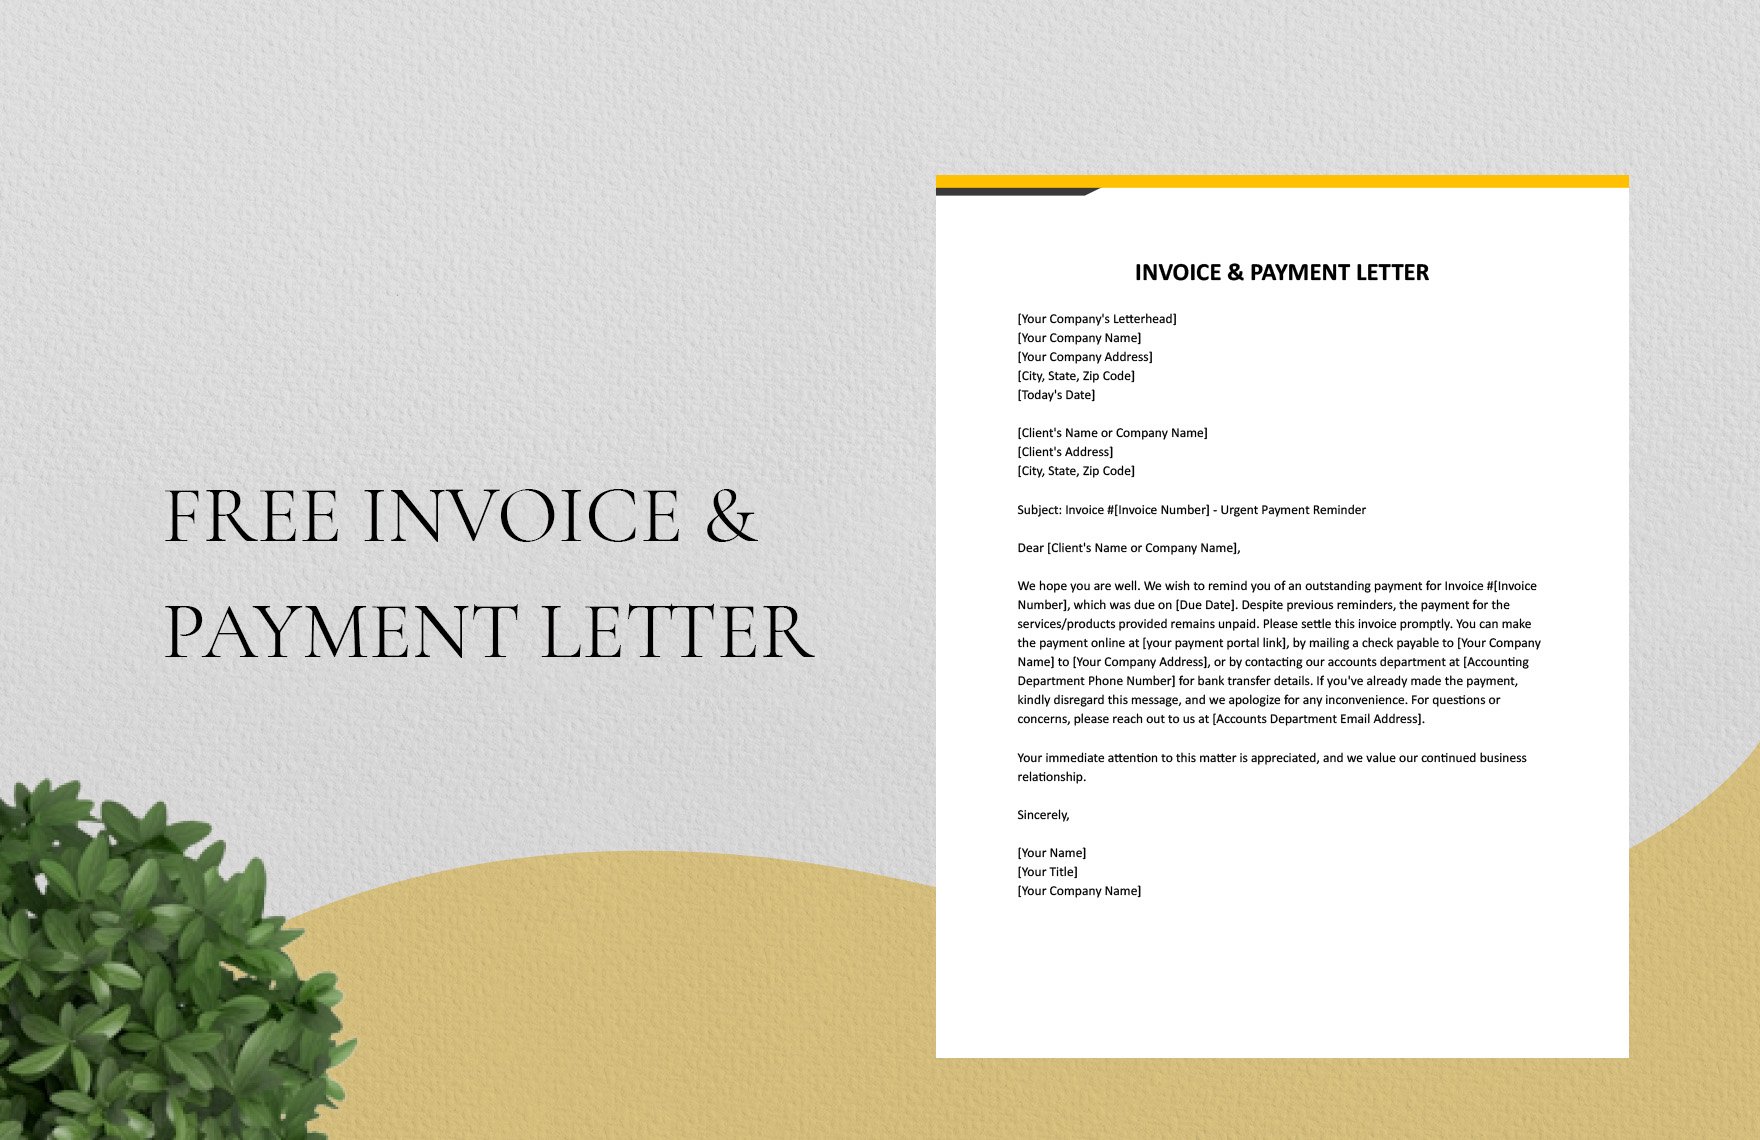 Invoice & Payment Letter